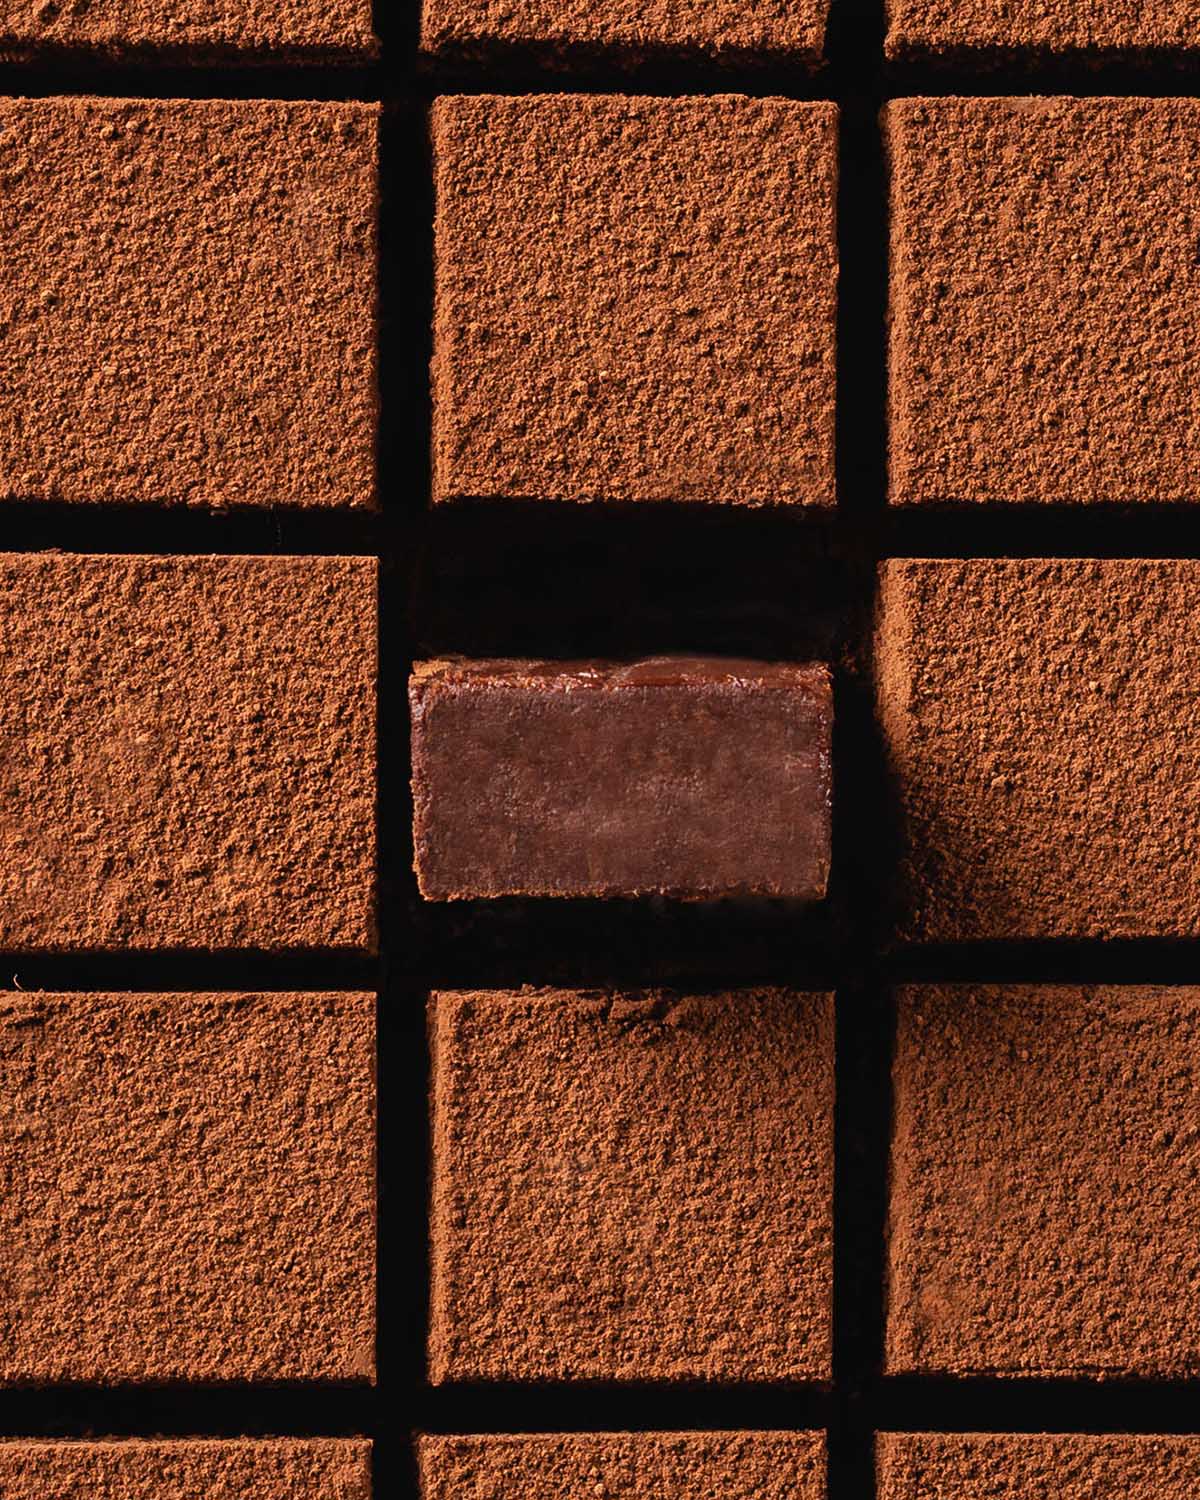 Close up of cut Japanese chocolate bars with one facing outward